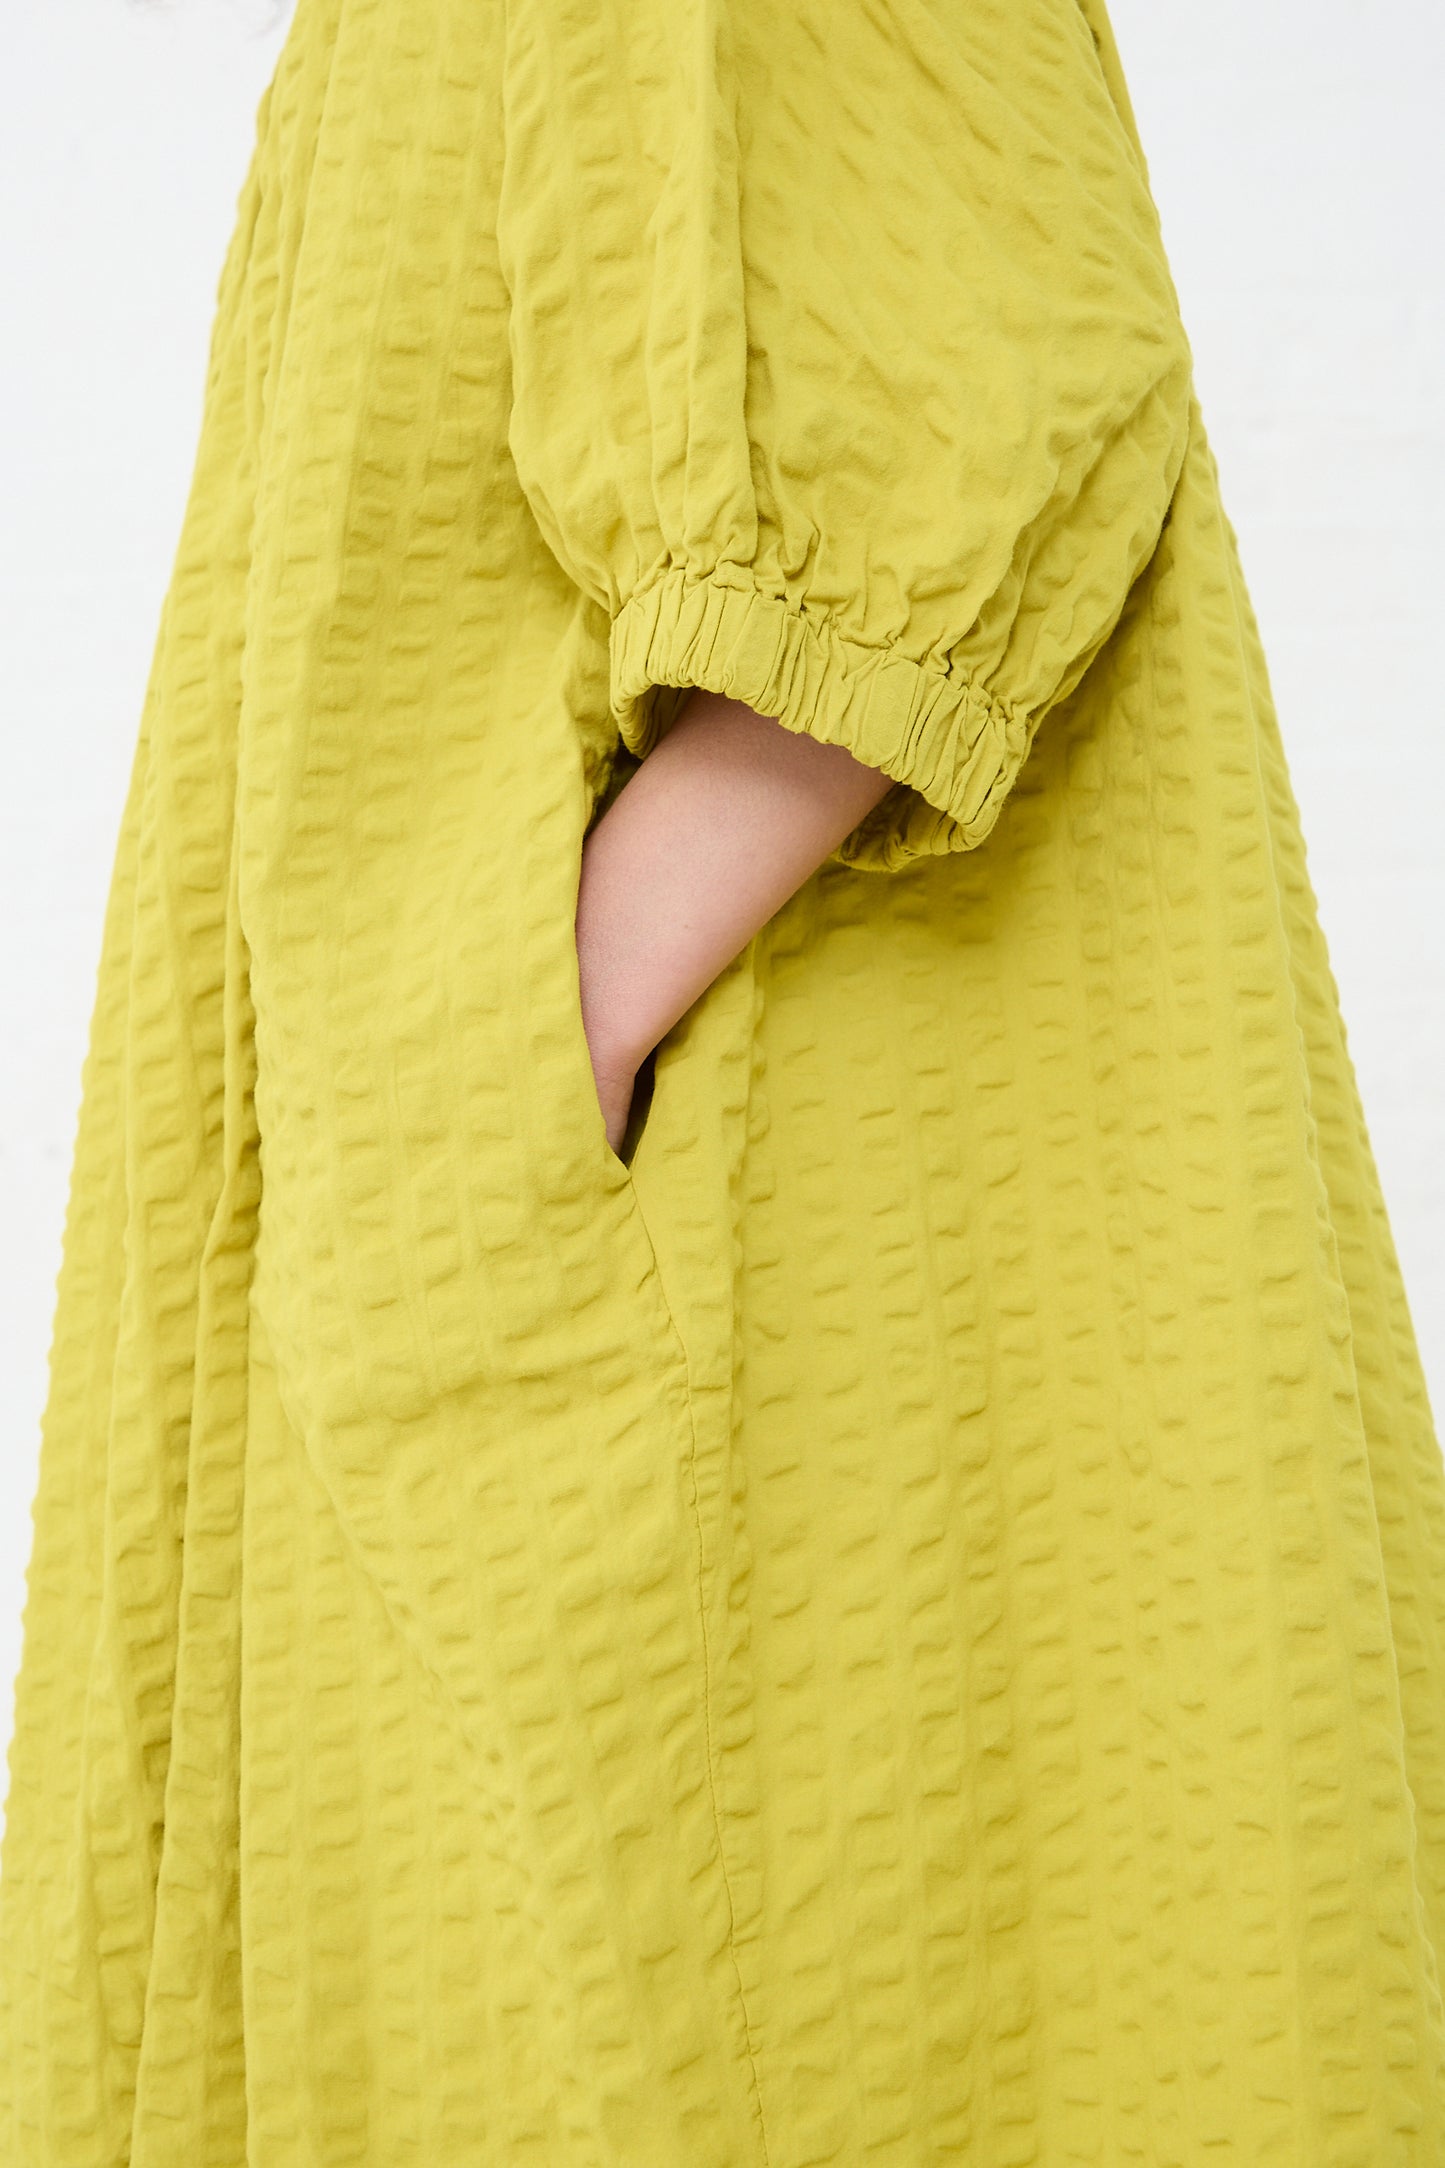 A hand protrudes from a slit in a textured yellow Cotton Seersucker Sack Dress in Turmeric by Black Crane.